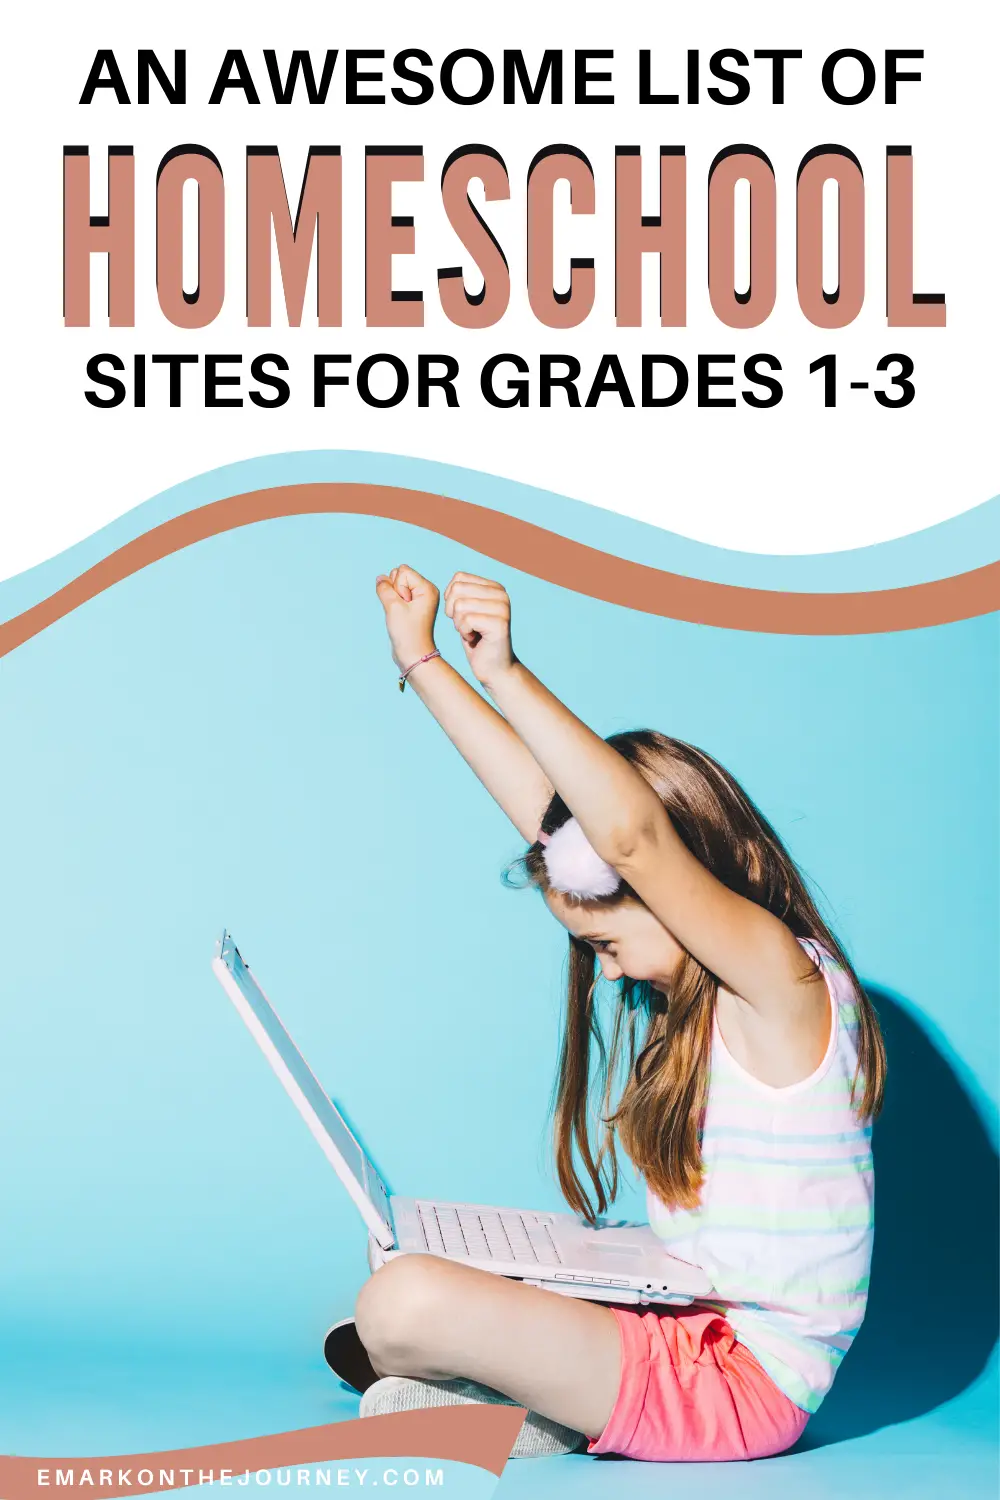 If you are homeschooling kids in grades 1-3, don't miss this amazing list of early elementary homeschool sites! Printables, book lists, and hands-on fun!